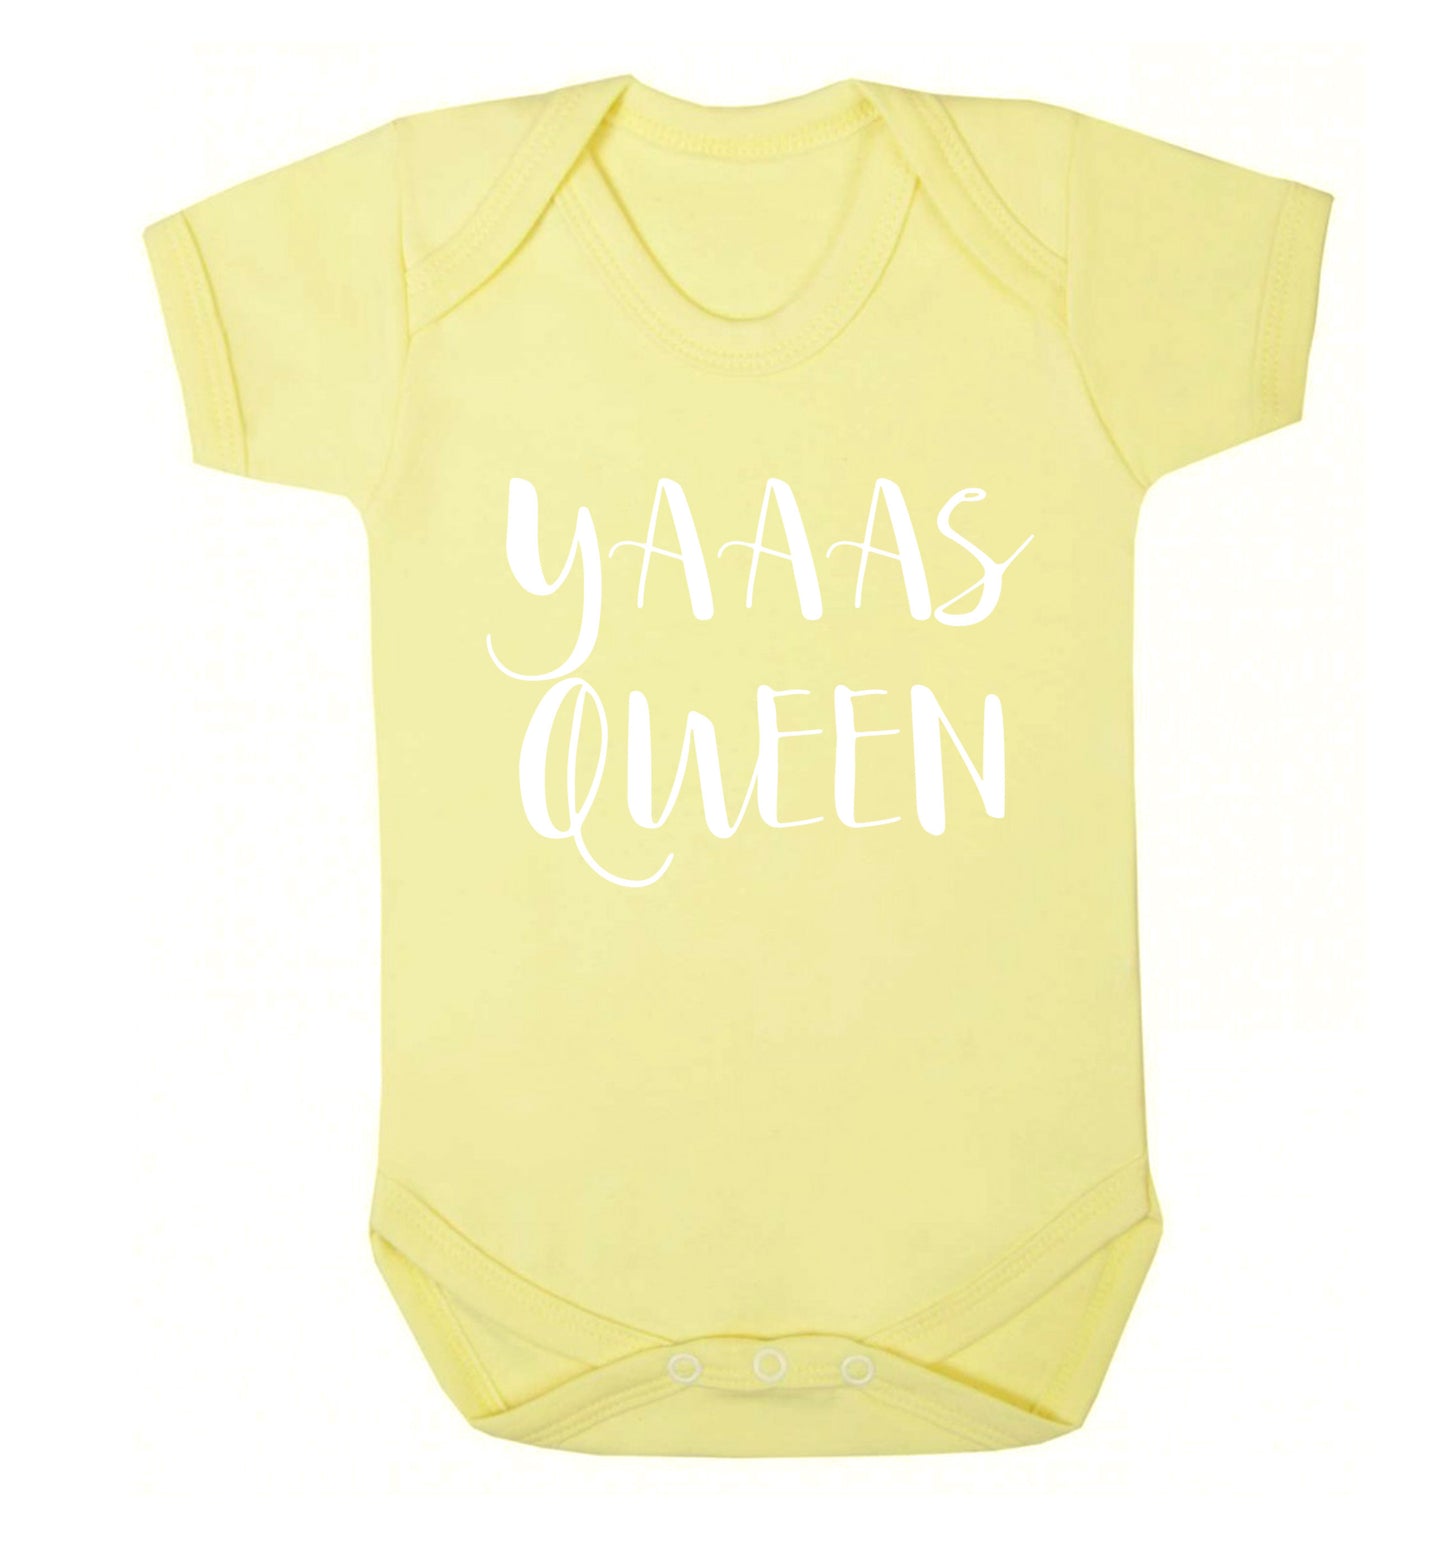 Yas Queen Baby Vest pale yellow 18-24 months